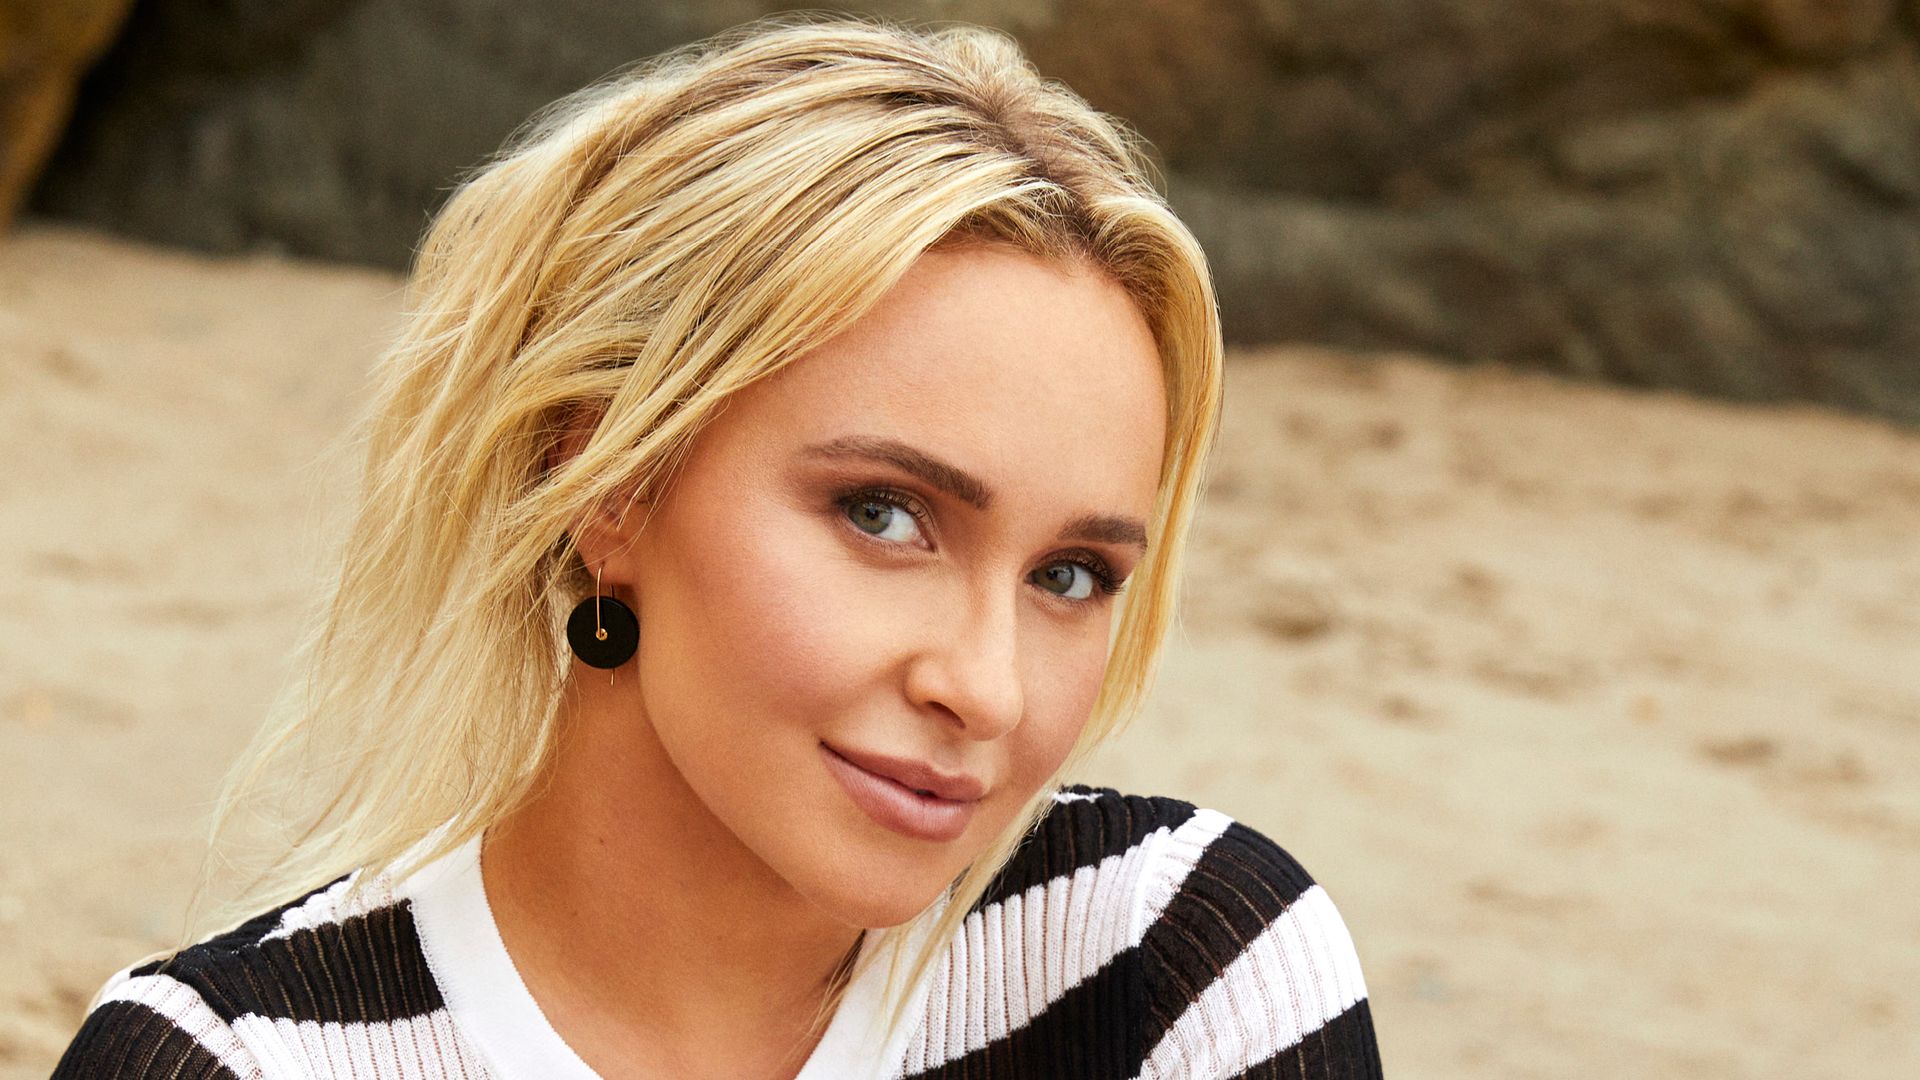 Hayden Panettierre in a striped top on the beach